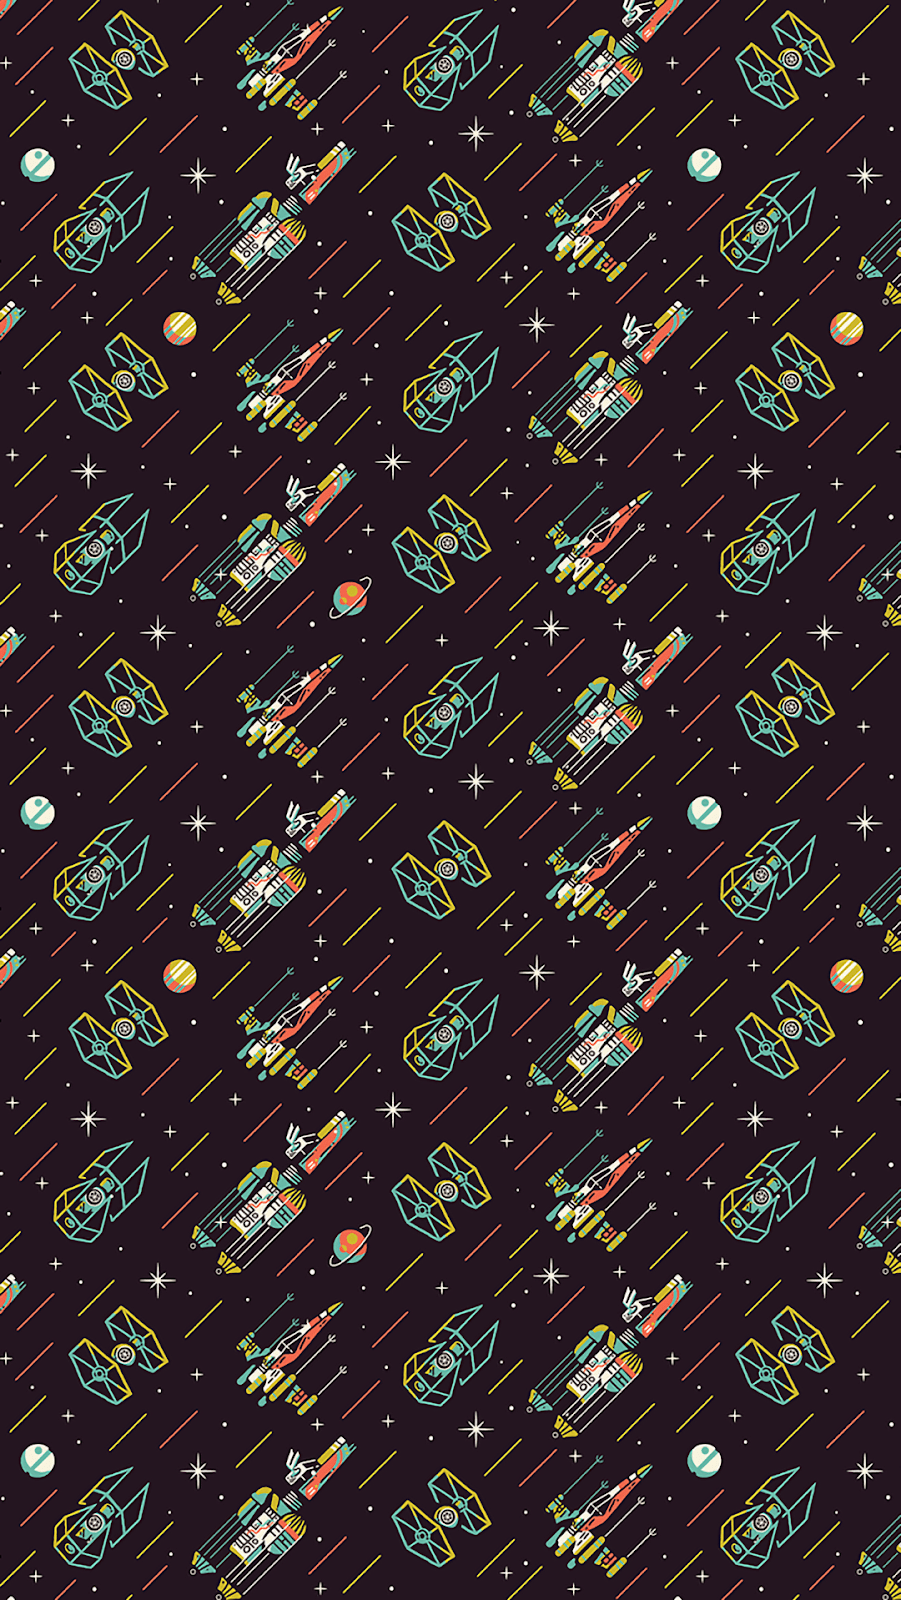 A pattern of ships and stars in a space scene - Star Wars